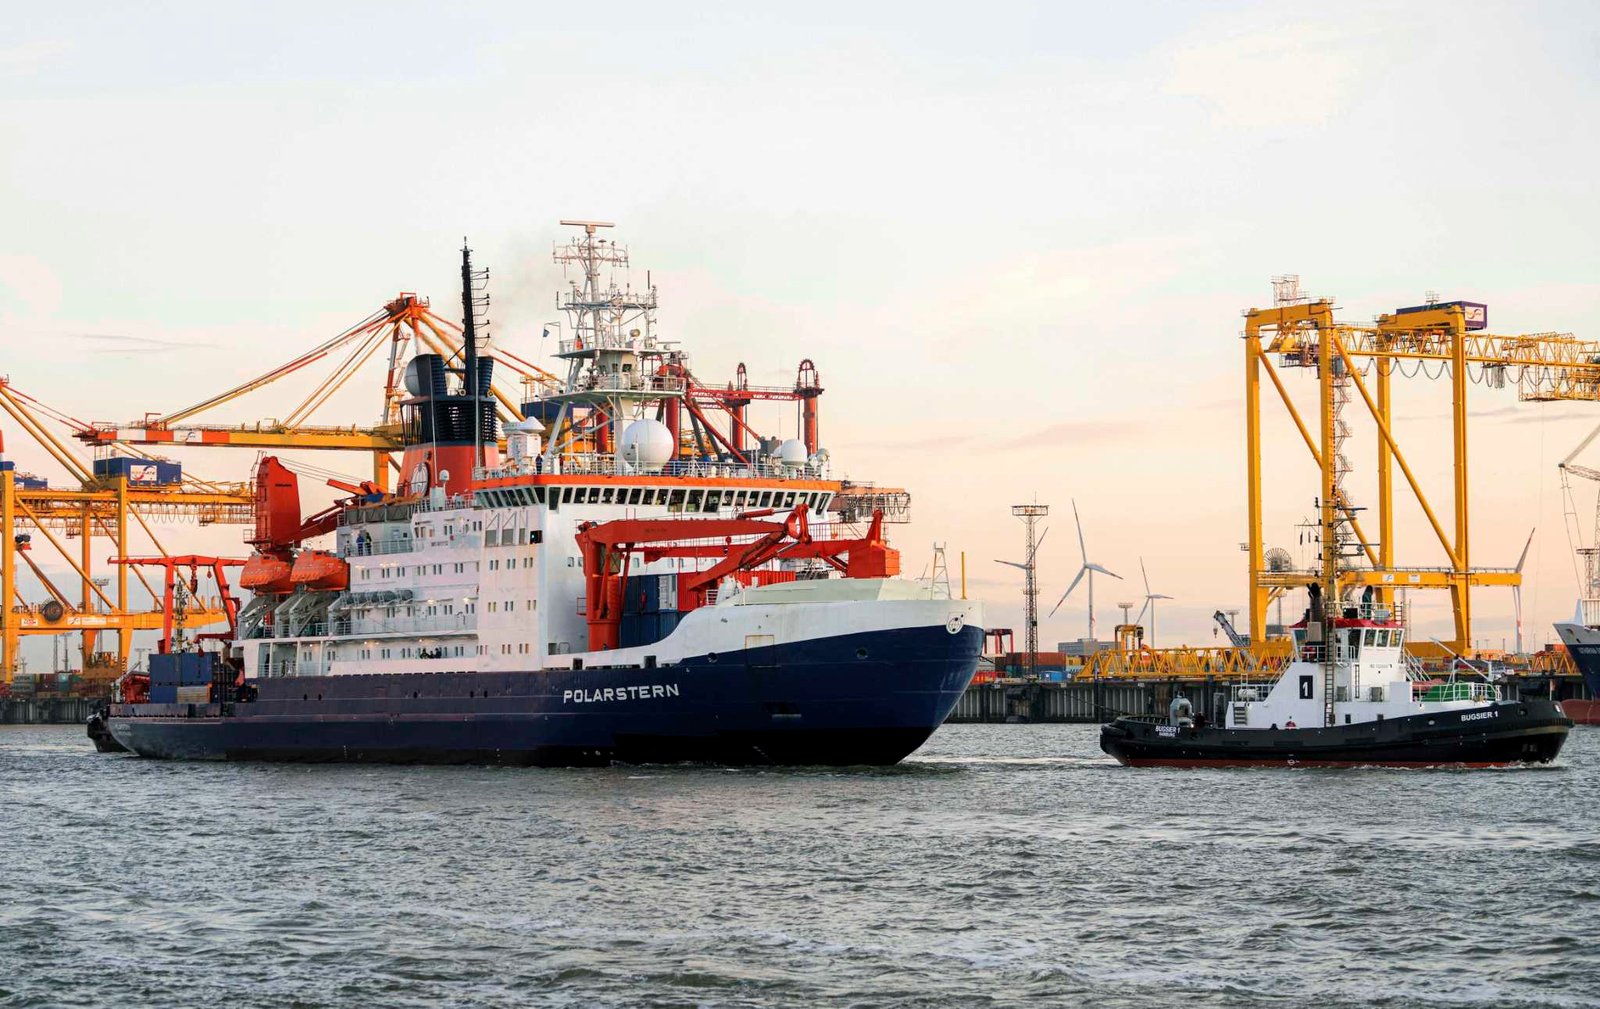 JUST IN: Celebration as Research ship POLARSTERN arrives in Bremerhaven